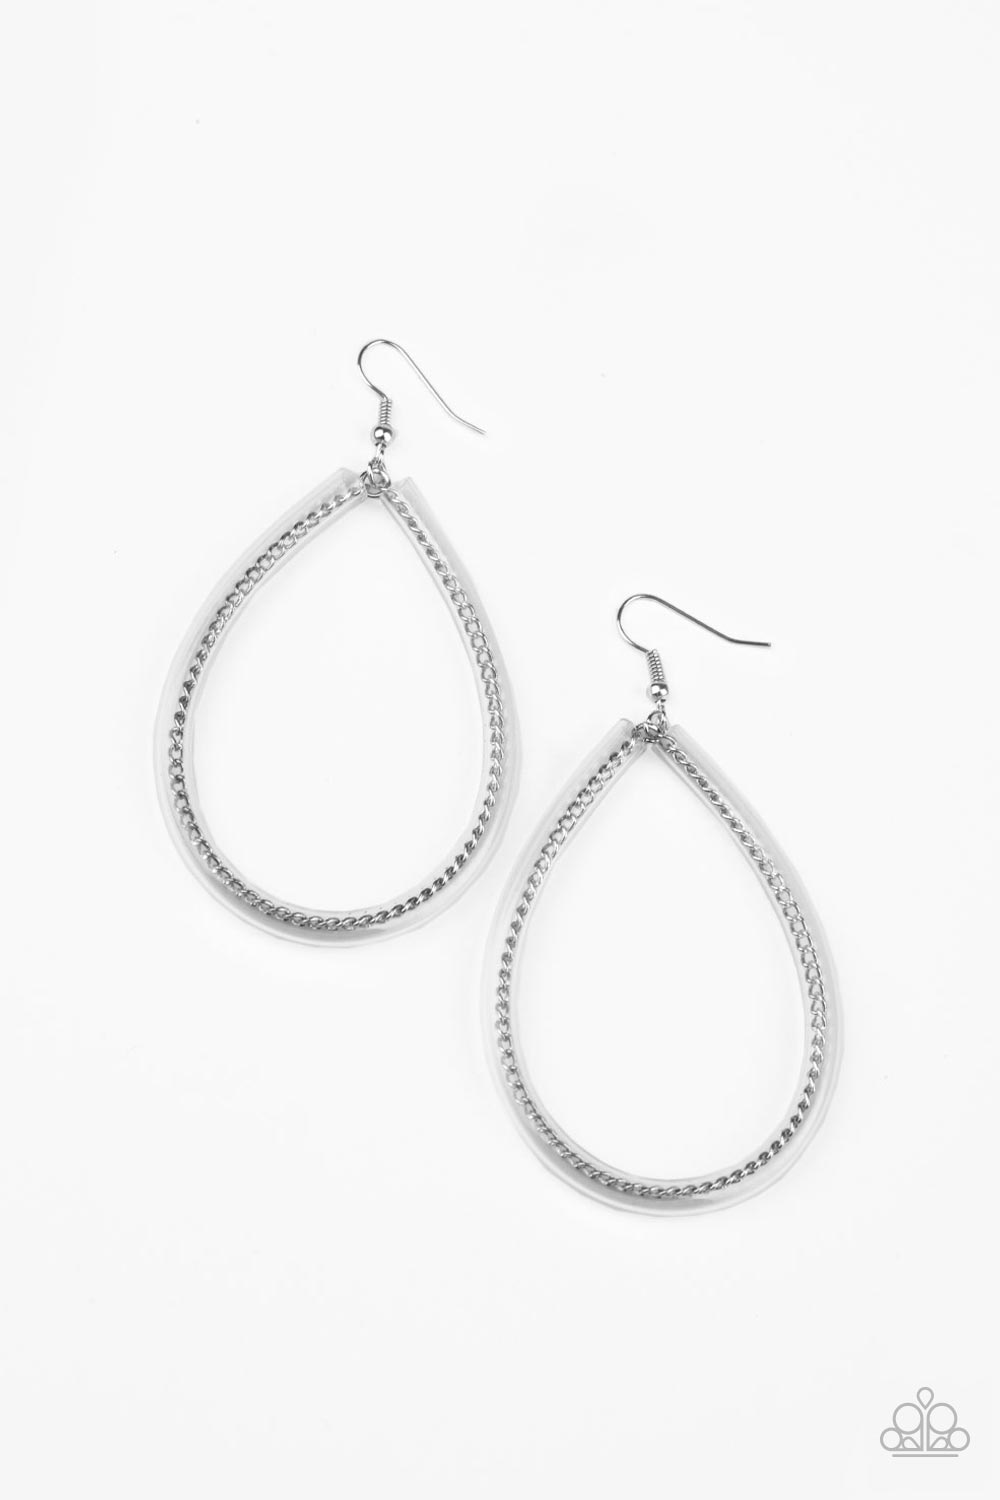 Paparazzi Earring -Just ENCASE You Missed It - Silver